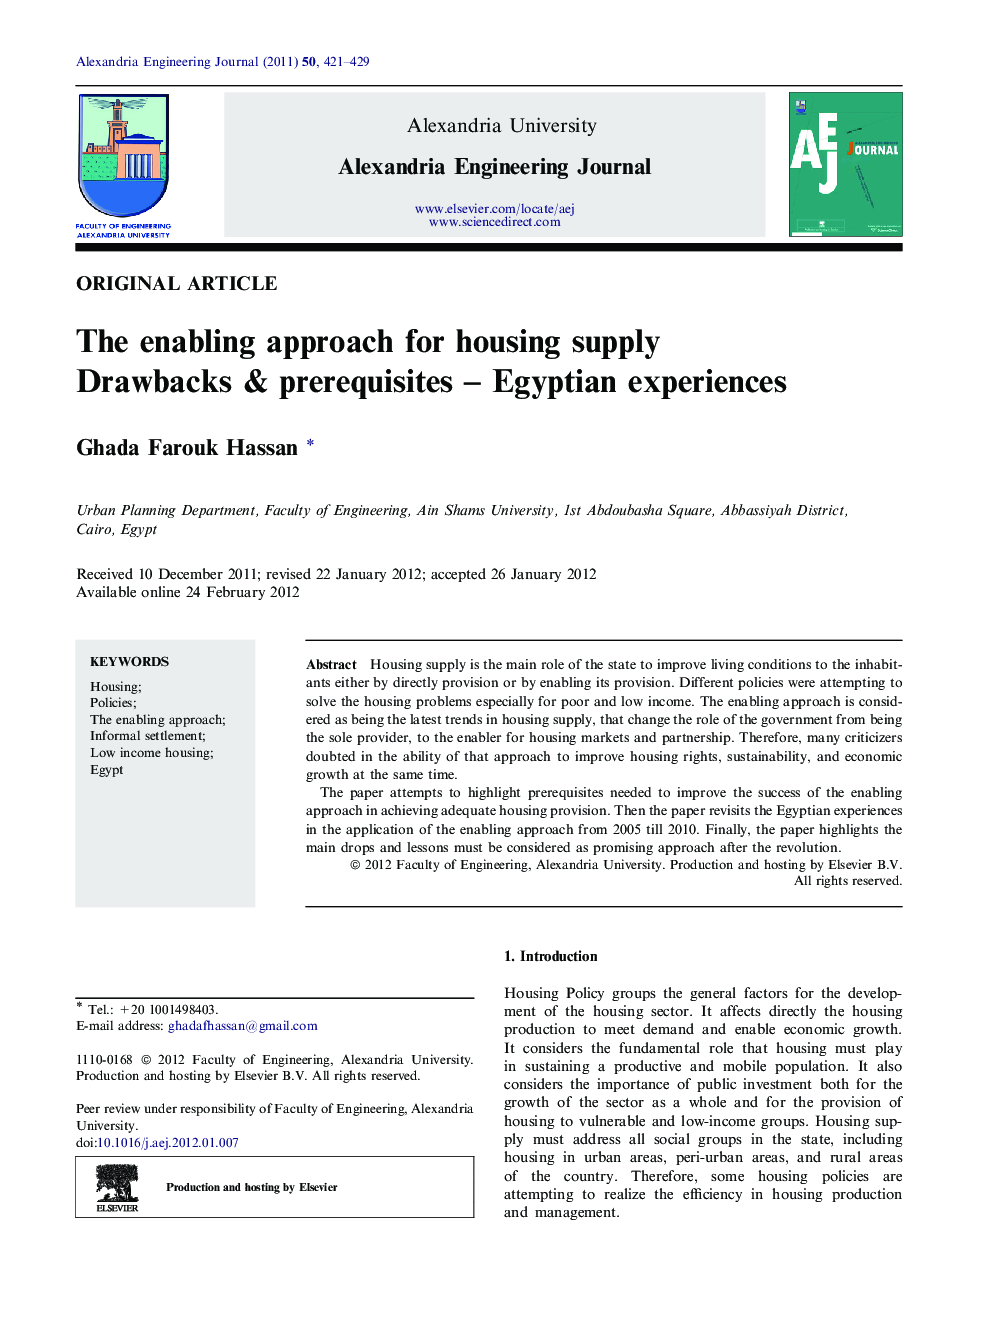 The enabling approach for housing supply